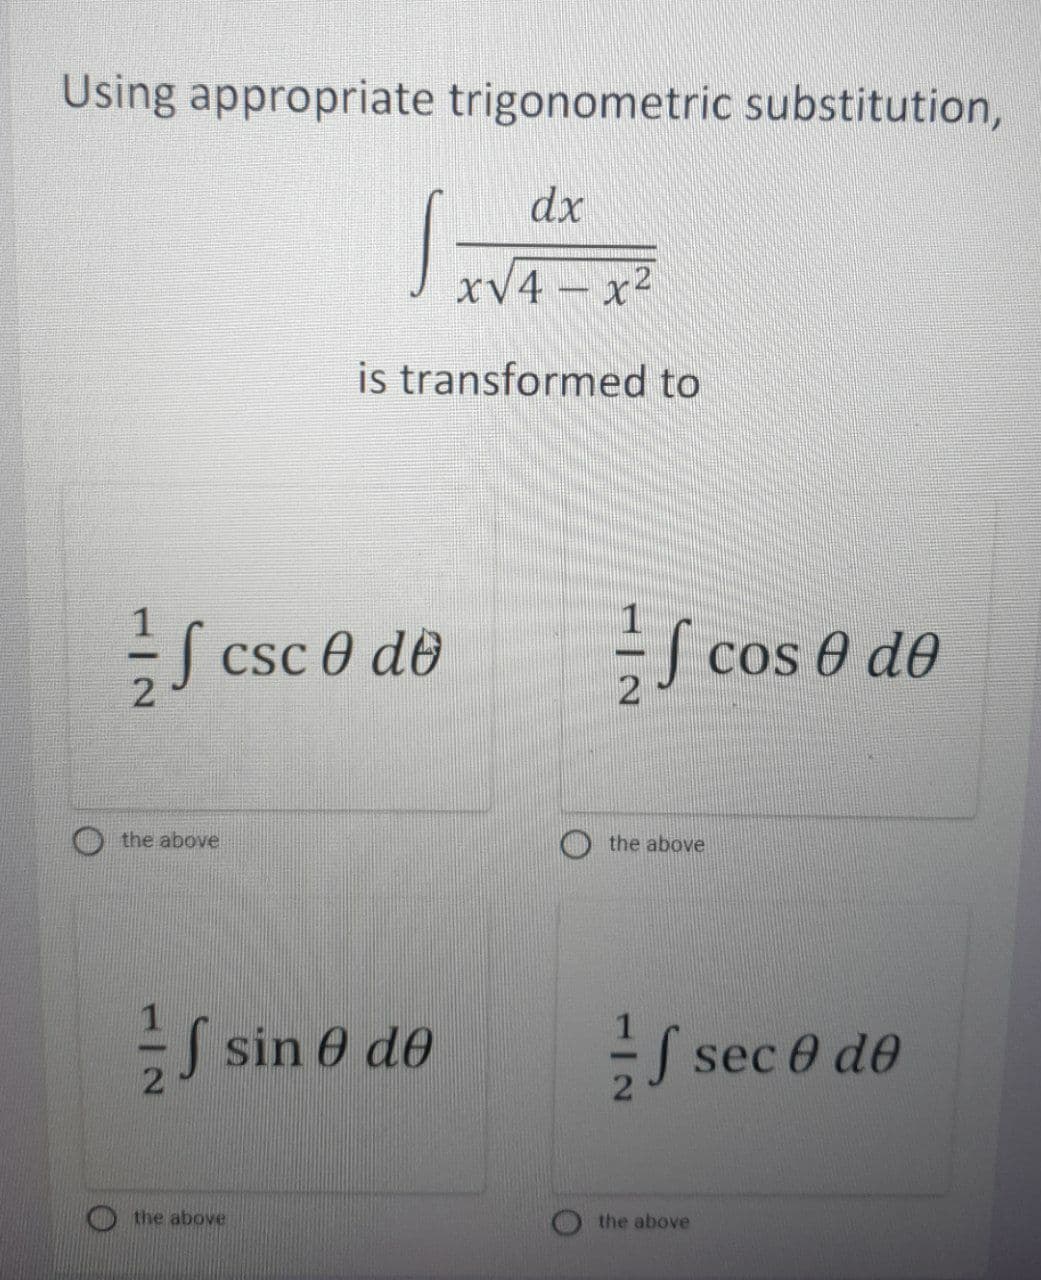 Using appropriate trigonometric substitution,
dx
xV4 - x2
is transformed to
Csc 0 de
cos e d0
the above
the above
J sin 0 d0
sec 0 de
the above
the above
